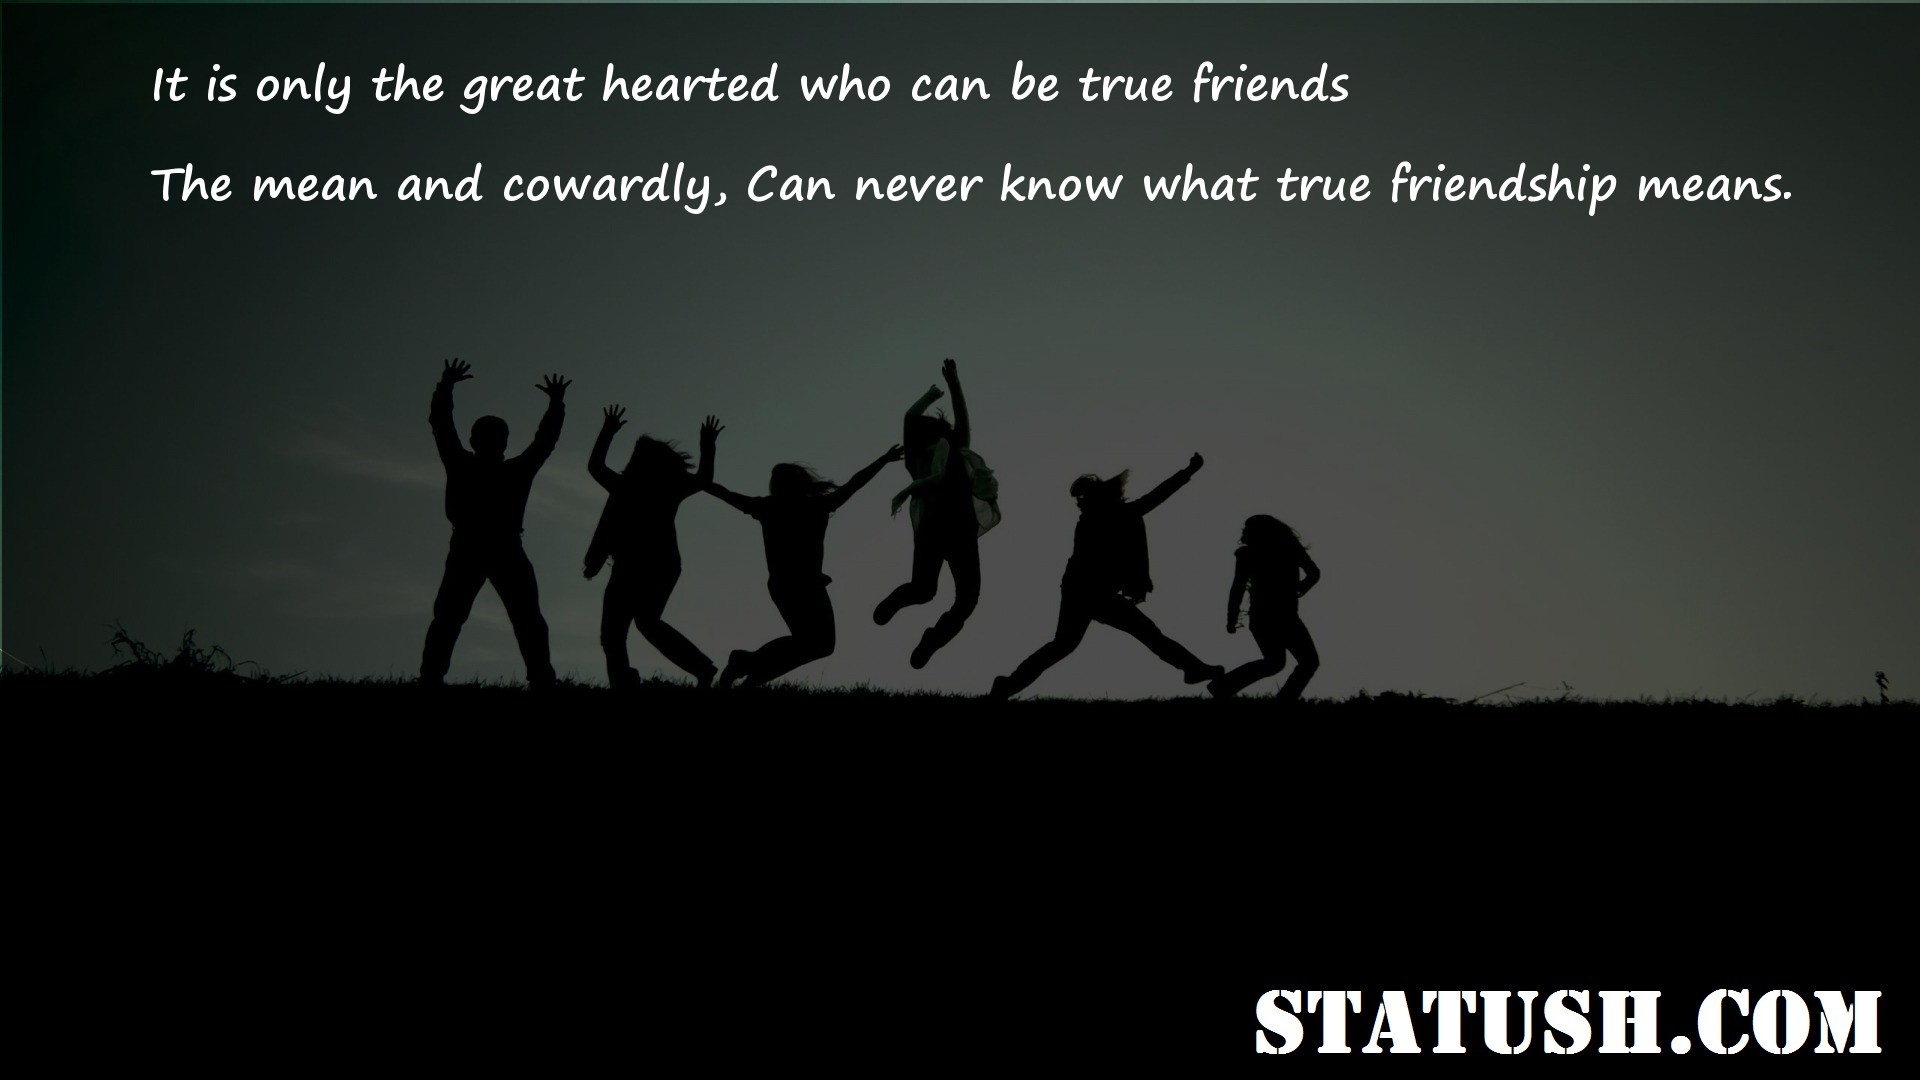 It is only the great hearted who can be true friends - Friendship Quotes at statush.com